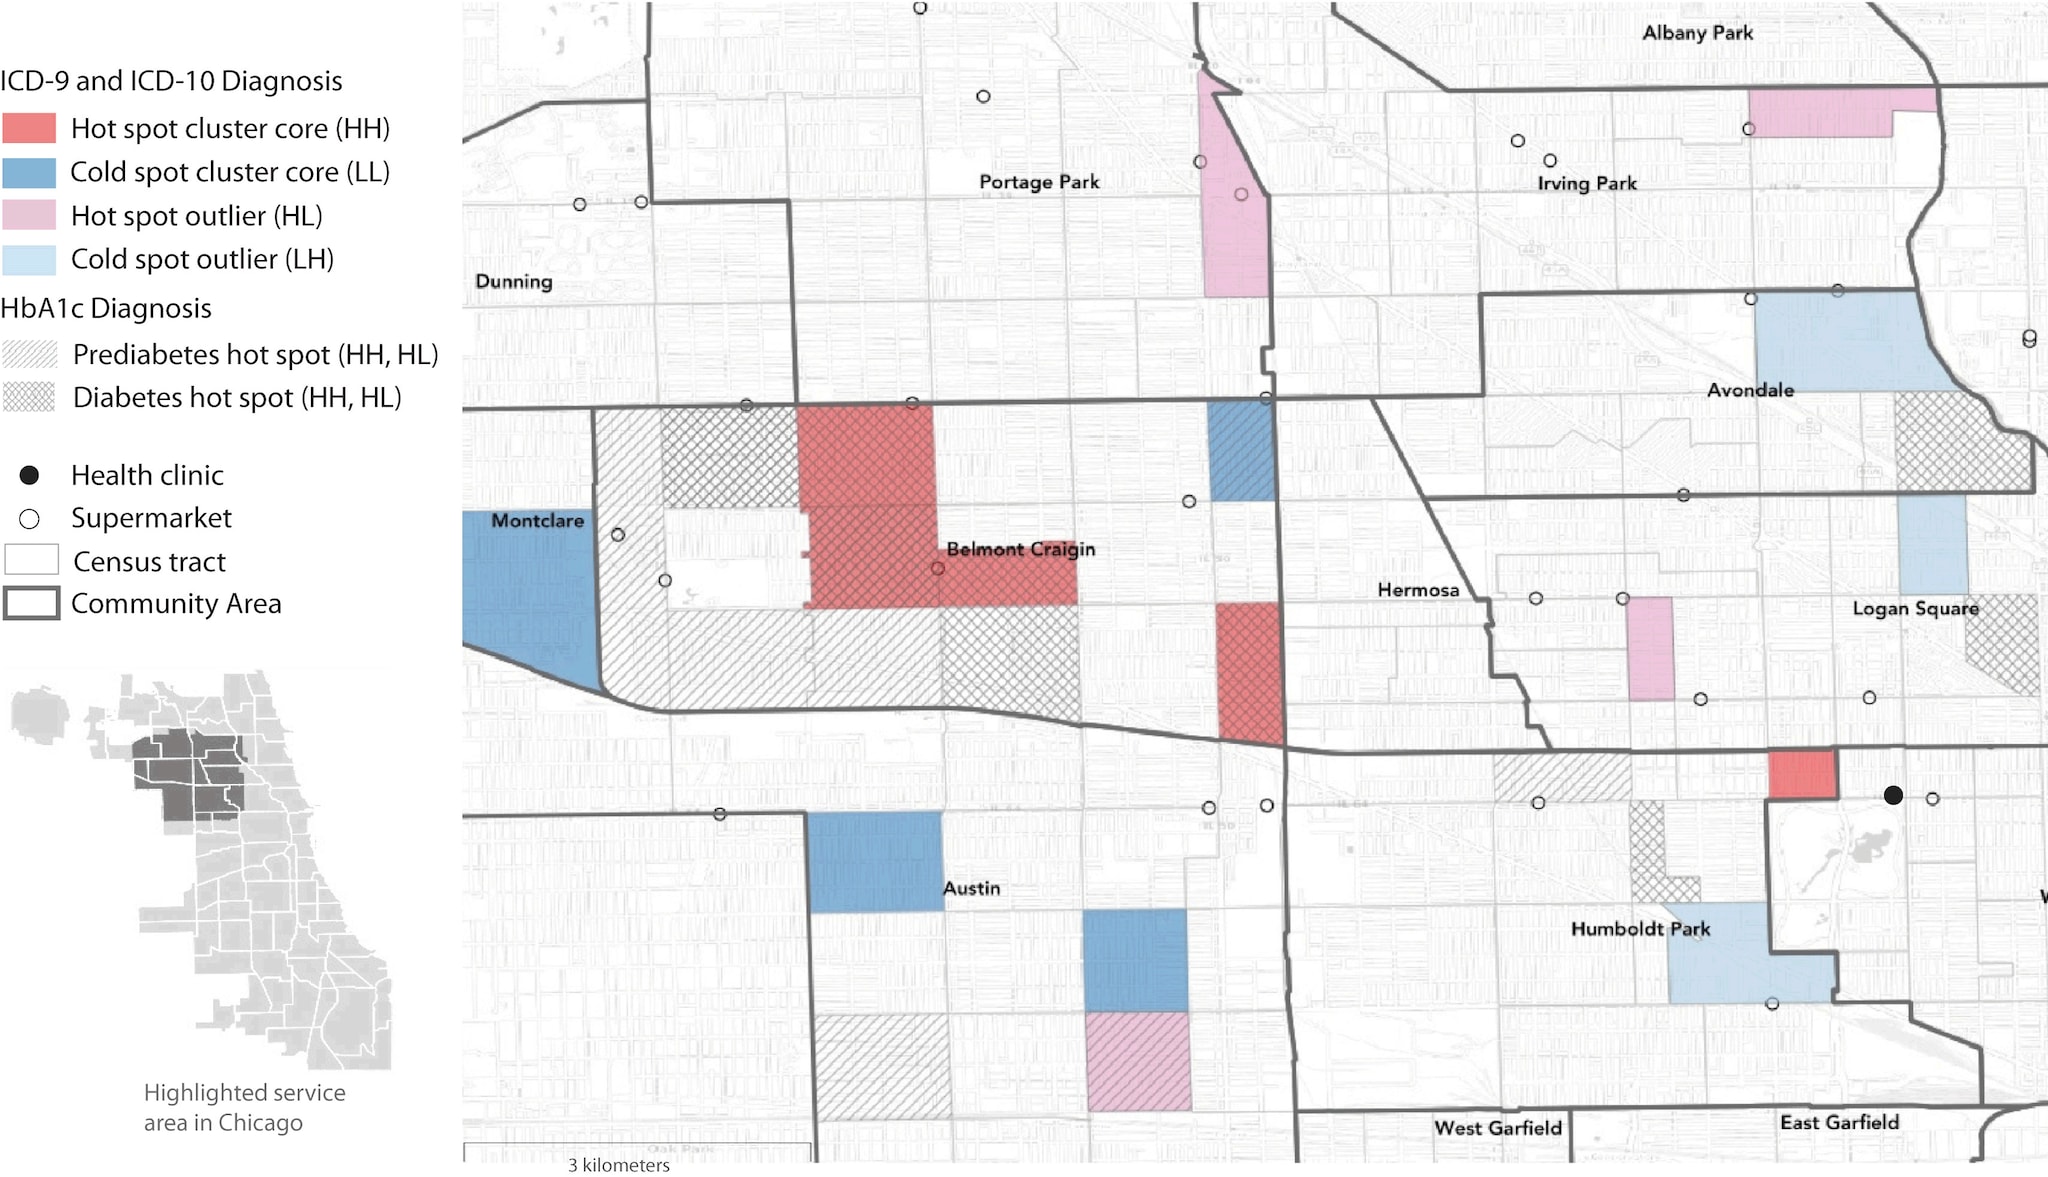 Diabetes and prediabetes prevalence across 2 diagnostic criteria is substantial in the Chicago community area of Belmont-Craigin for this patient population. In this neighborhood, ICD-9 and ICD-10 diagnostic diabetes cluster cores correspond to areas of high diabetes prevalence, determined by measuring HbA1c levels, with neighboring tracts often characterized as prediabetes hot spots. Isolated tract outliers of diabetes hot spots occur in Austin, Portage Park, and Irving Park. Isolated cold spots determined by using ICD codes occur in Avondale, Logan Square, and Humboldt Park; however, these areas also neighbor tracts of high diabetes prevalence determined by using measured HbA1c levels. Humboldt Park, which contains the health center, also has areas of high diabetes and prediabetes prevalence, determined by using ICD codes and measures of HbA1c. Consistent cold spots of low diabetes incidence are farthest from the health center, on the west side of the service area, in Austin and Montclare.